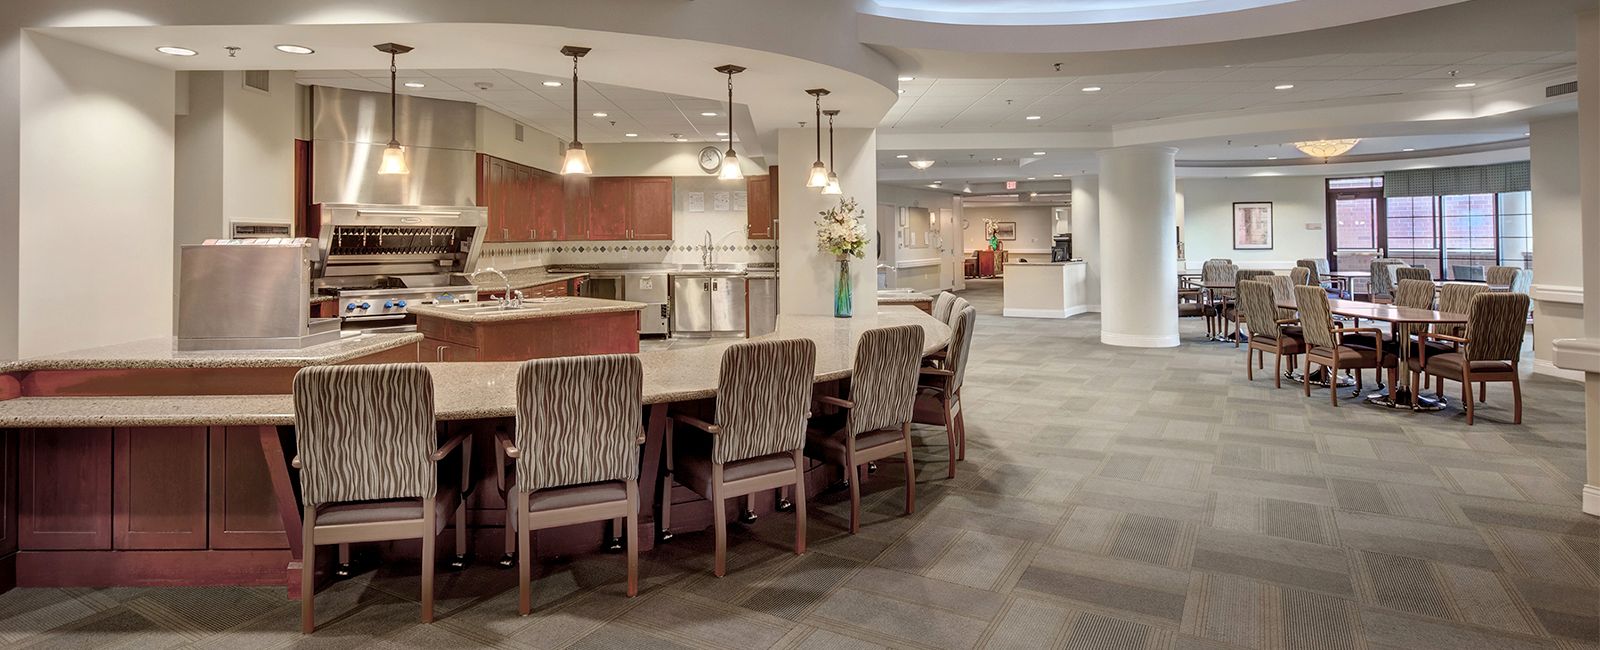 Senior living community at Lakeview Village featuring modern architecture, dining room, kitchen island, and furniture.